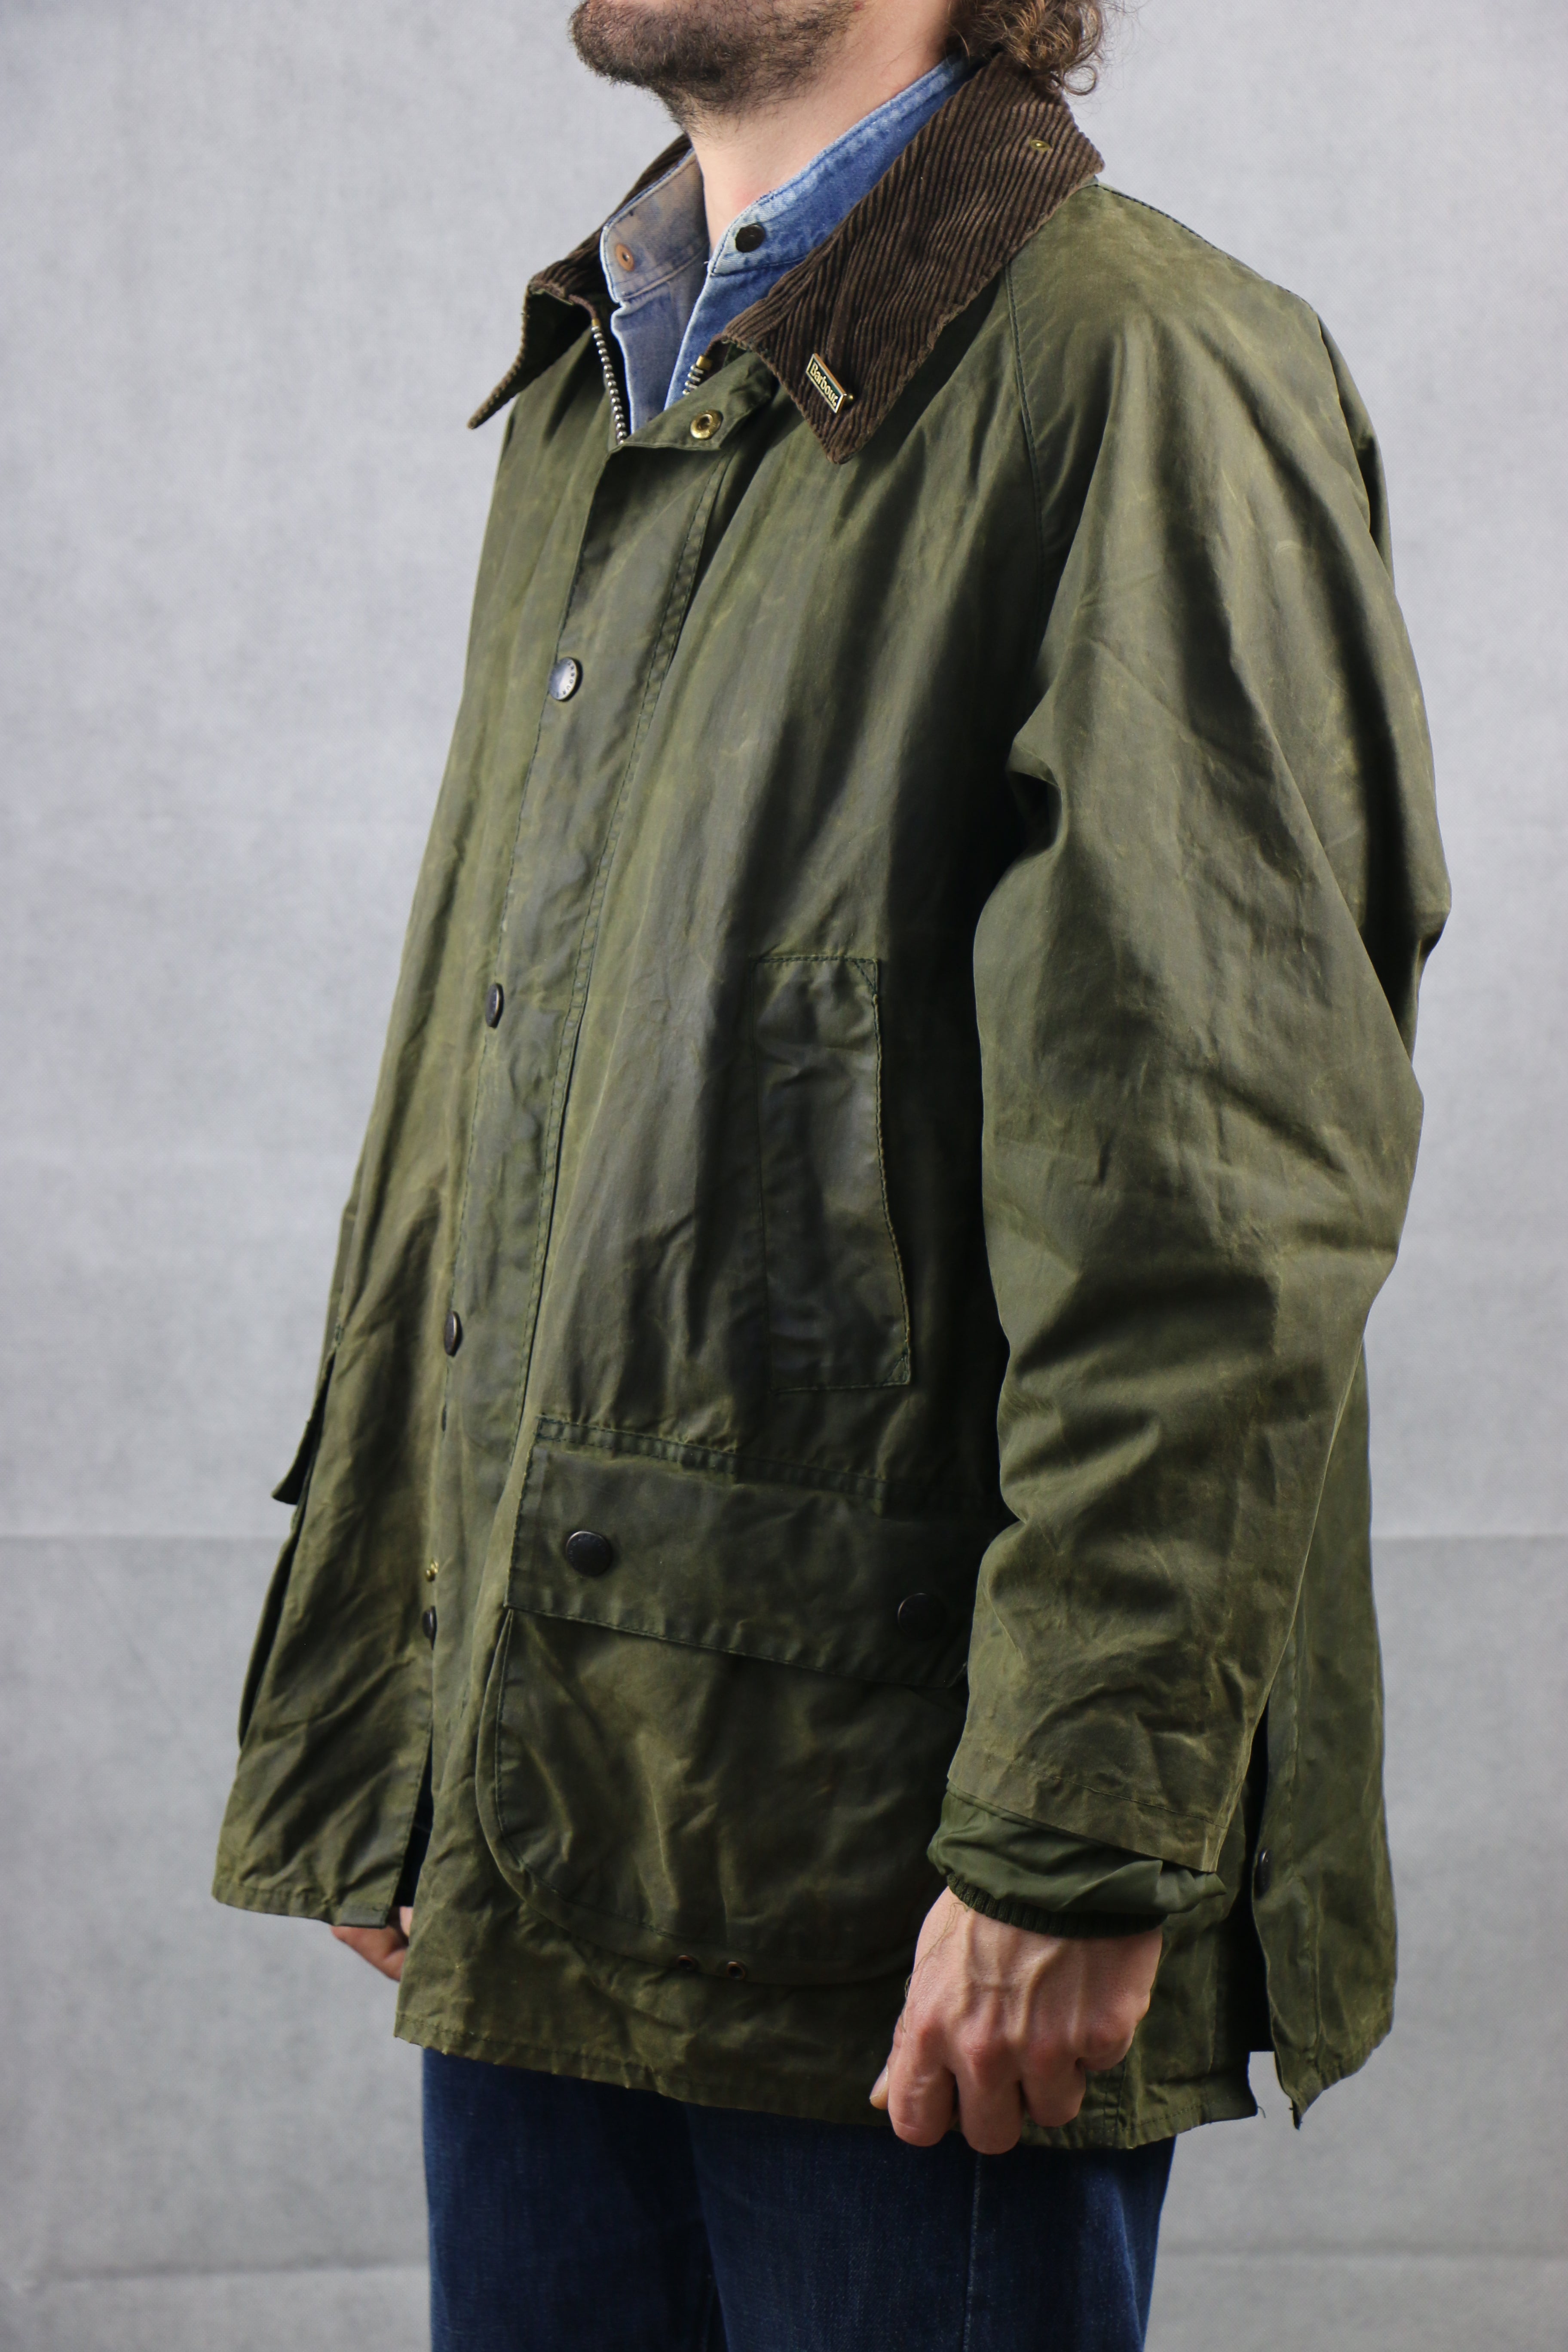 Barbour 'Bedale' C46 Wax Jacket Military Green ~ Vintage